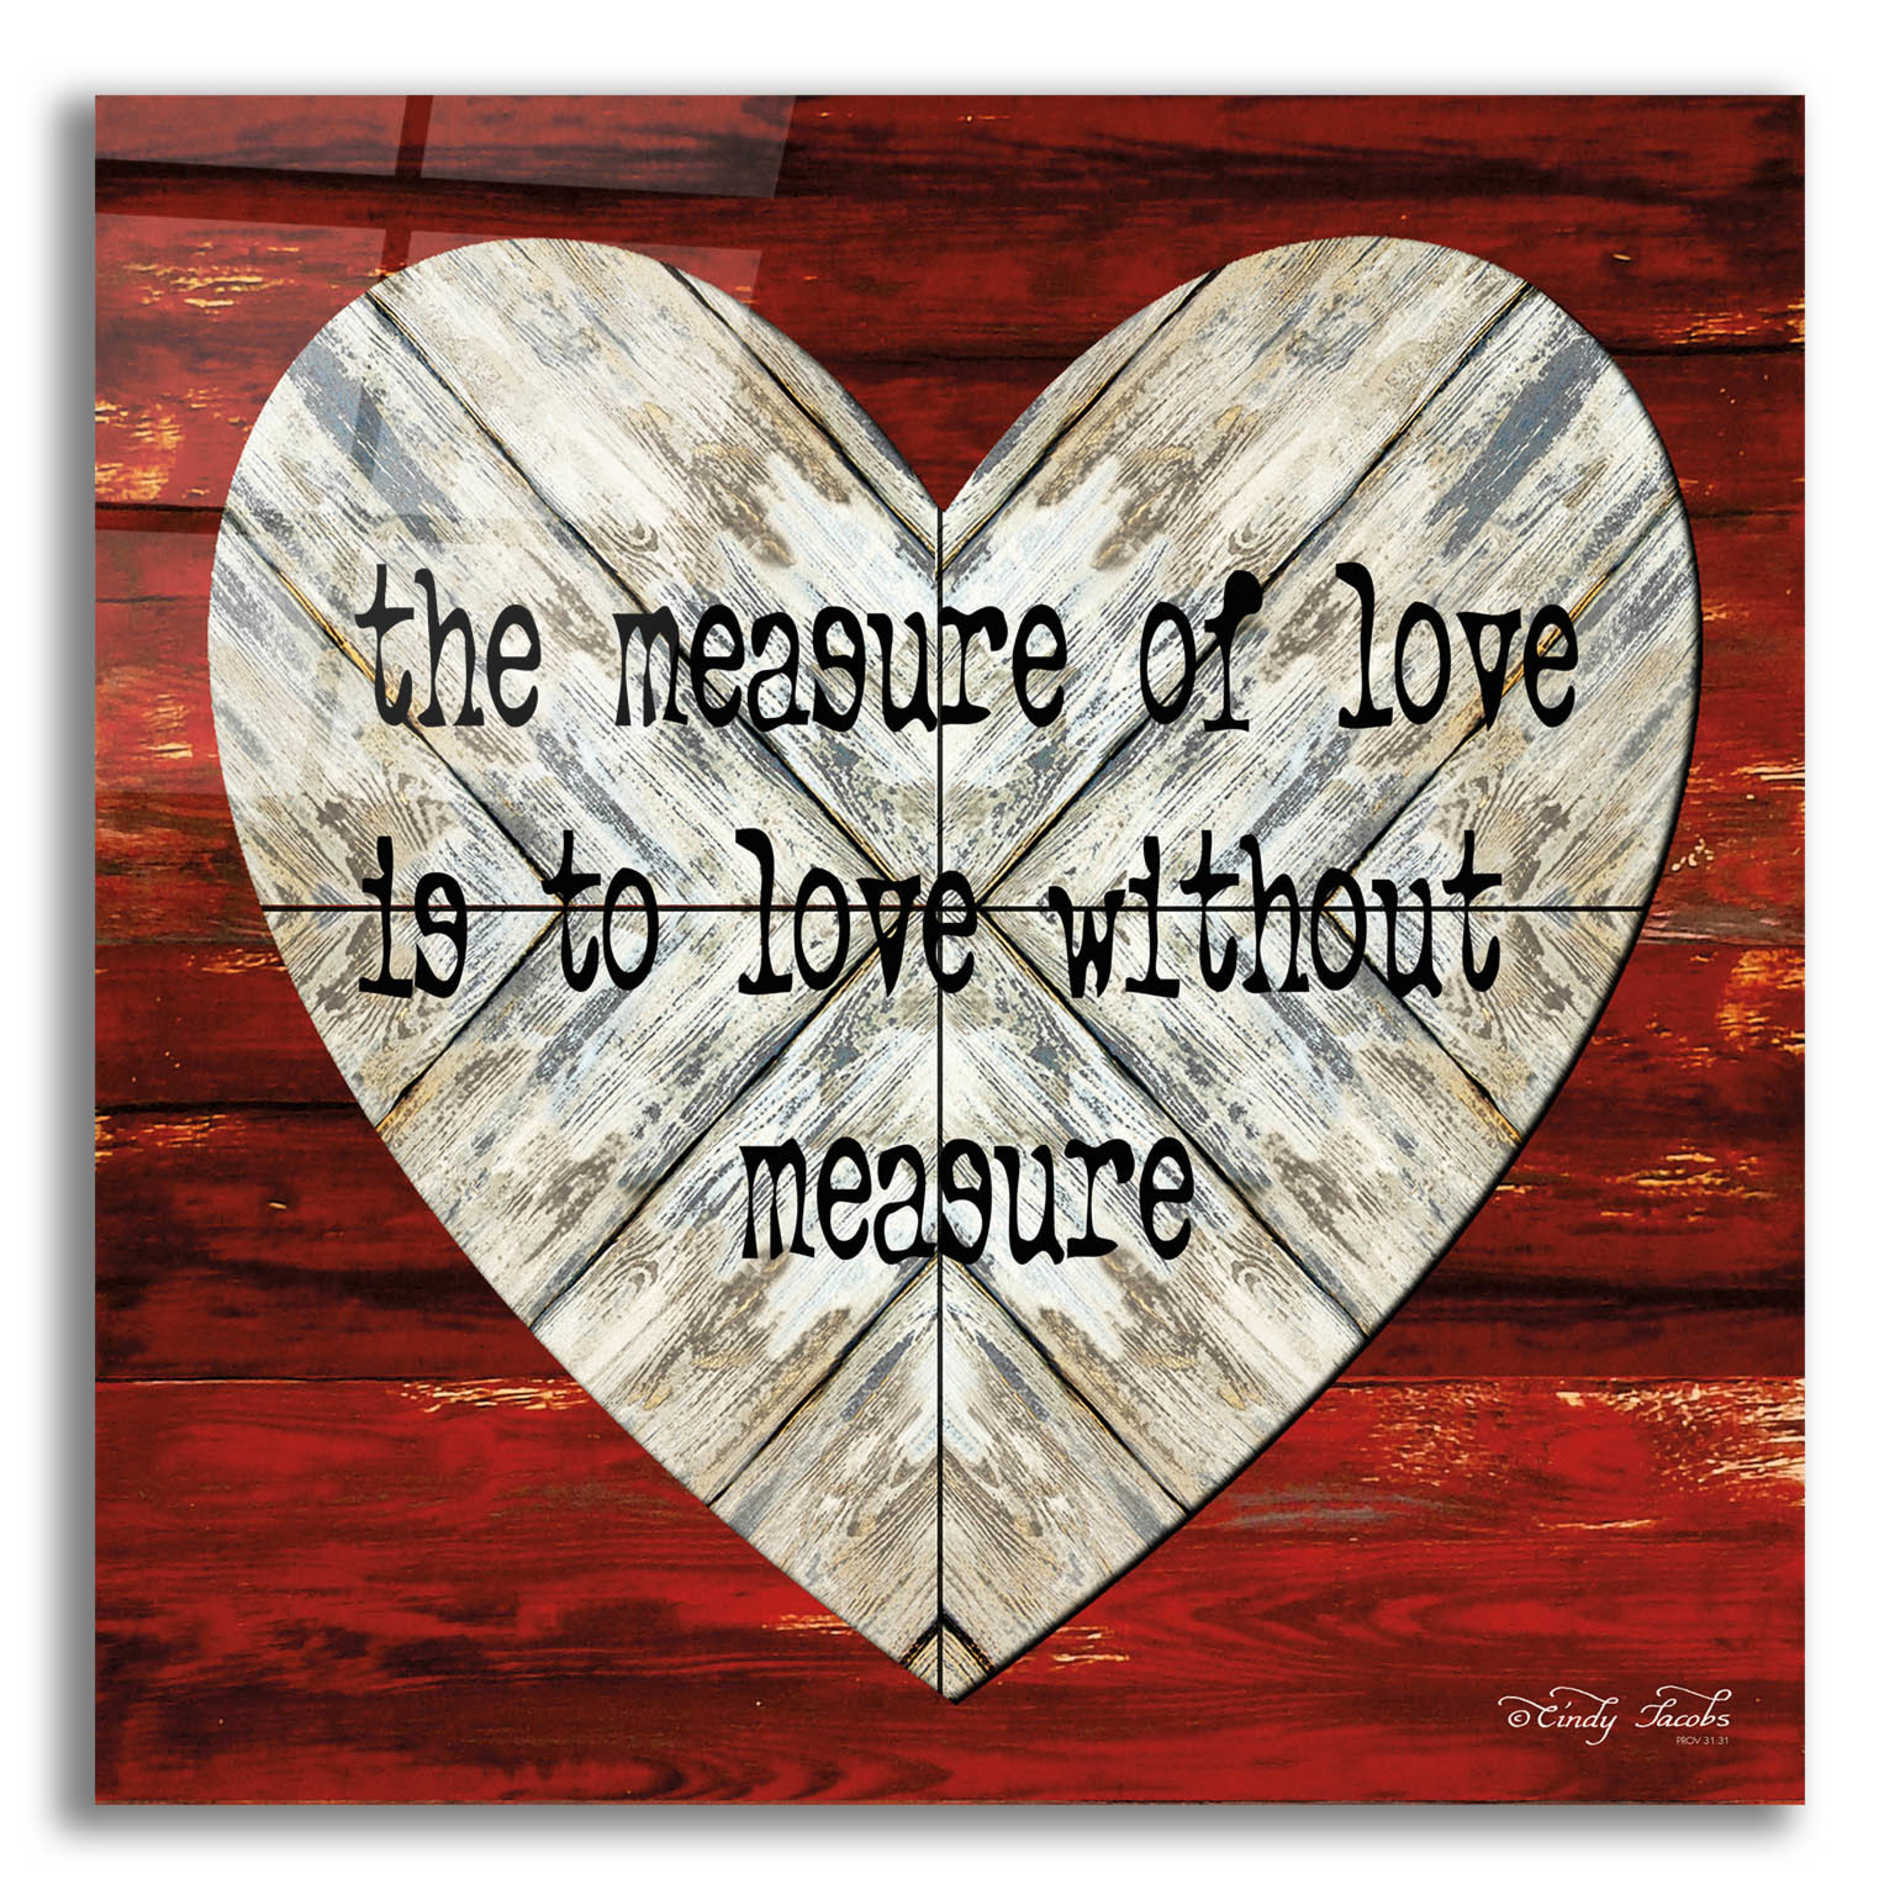 Epic Art 'The Measure of Love' by Cindy Jacobs, Acrylic Glass Wall Art,12x12